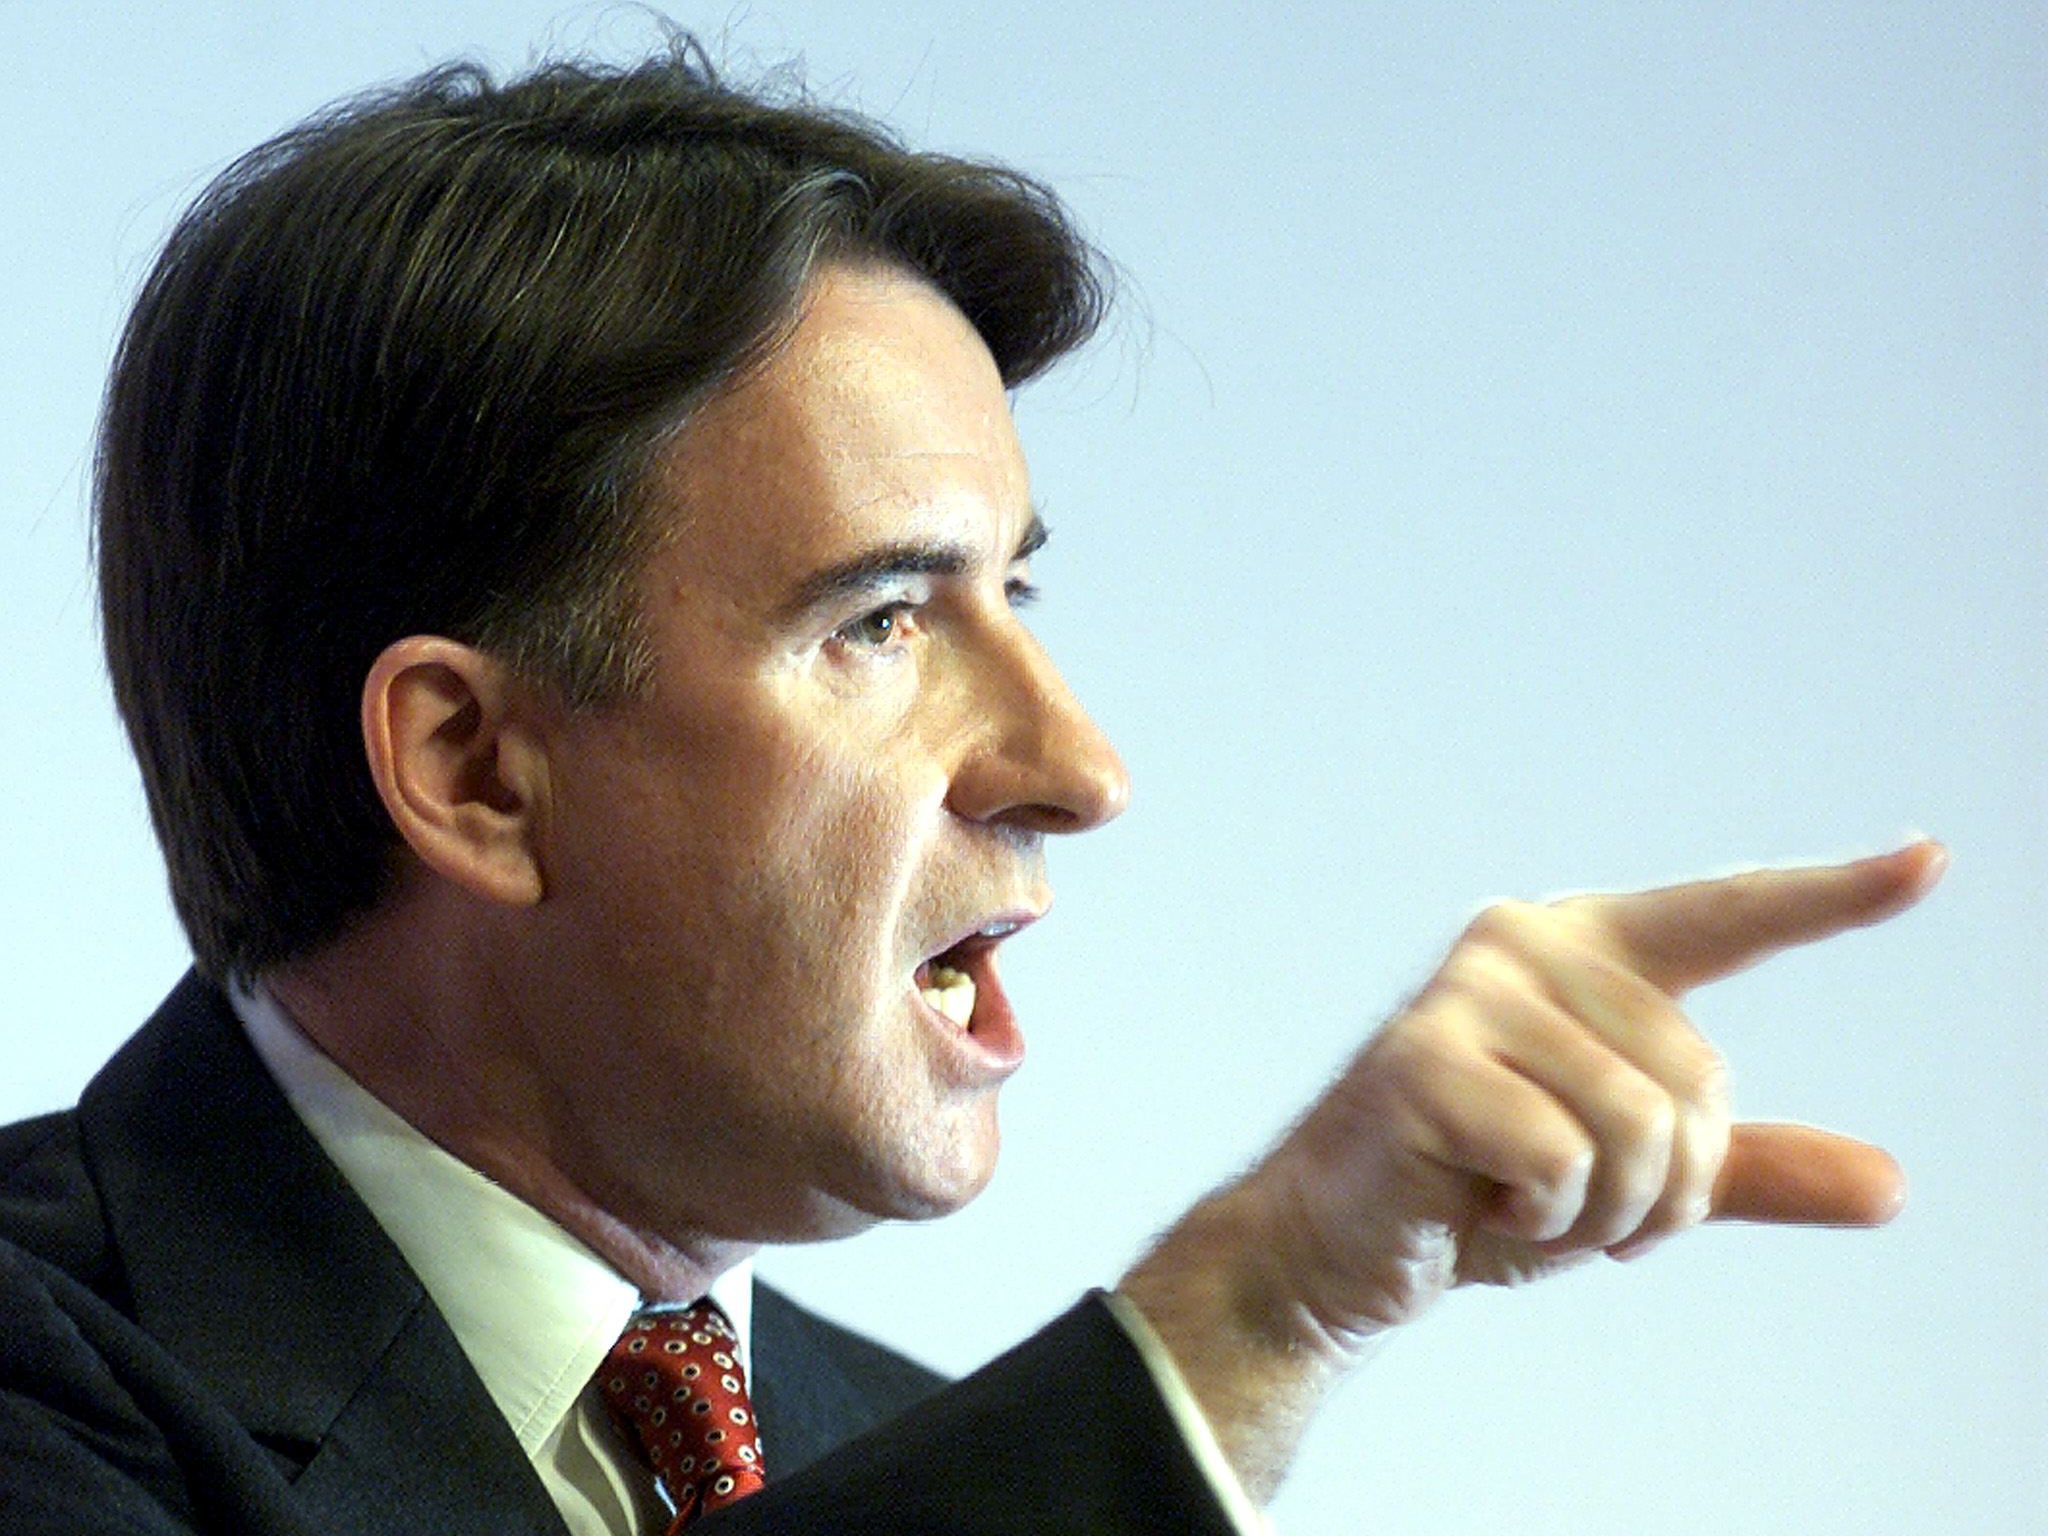 Peter Mandelson first resigned from the cabinet on 23 December 1998